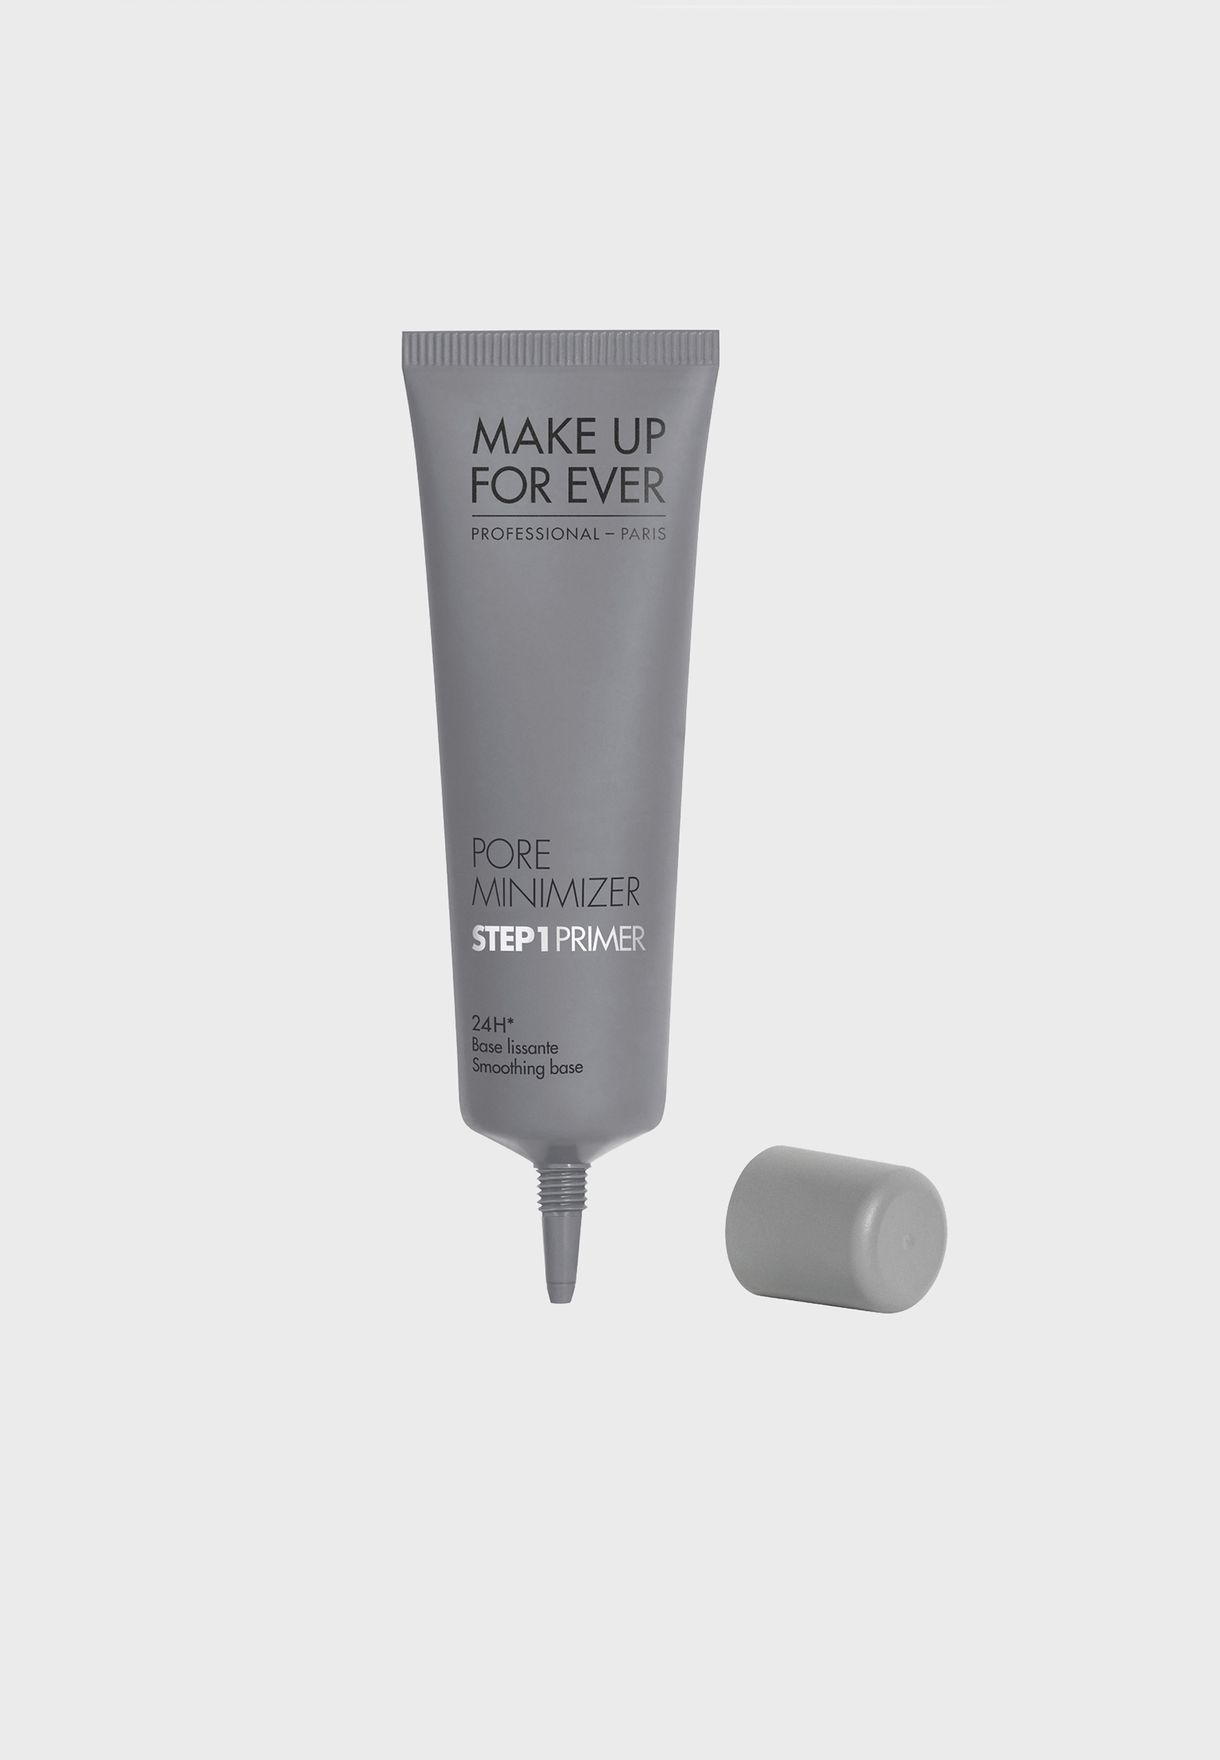 Праймер pore. Make up for ever Pore Minimizer Step 1 primer 24h Smoothing Base. Make up Forever Pore Minimizer. Sensitive primer Pore Minimizer (03). Sheer Cover Base Perfector.